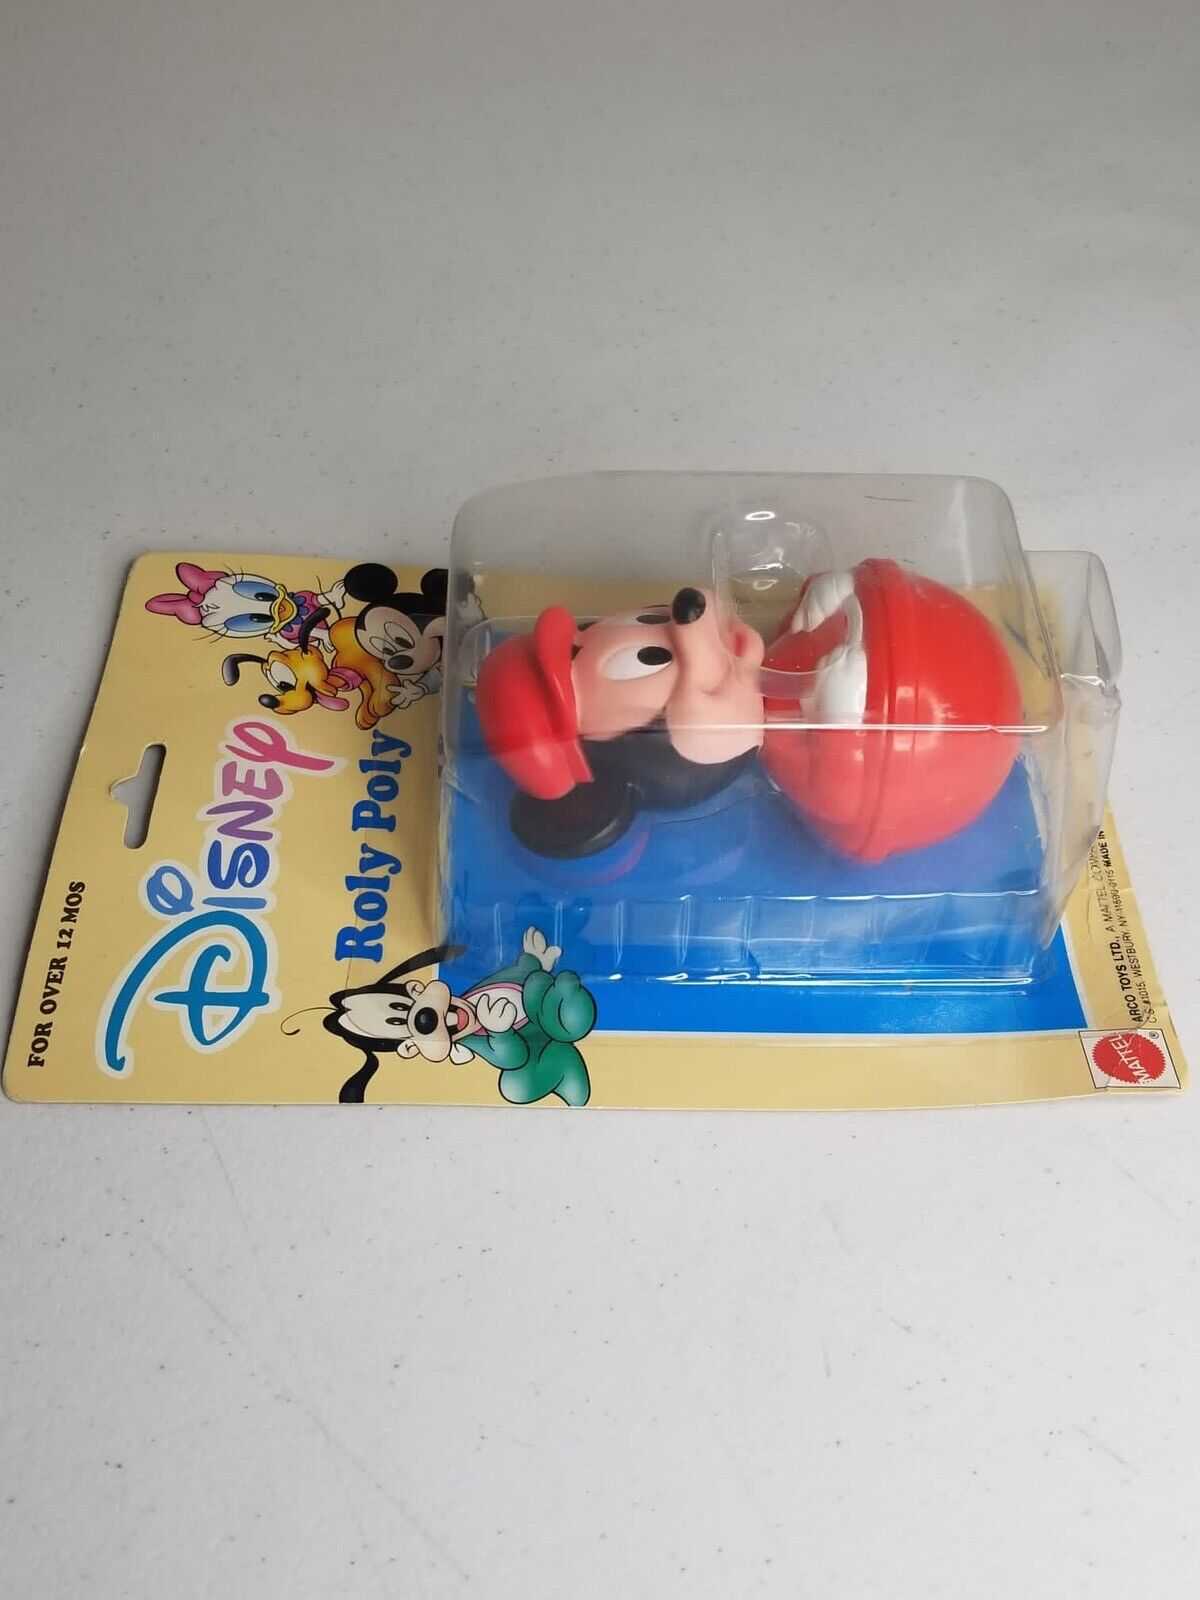 Vintage Disney Roly Poly Weeble Wobble Toy - Rare Mickey Mouse Collectible - TreasuTiques